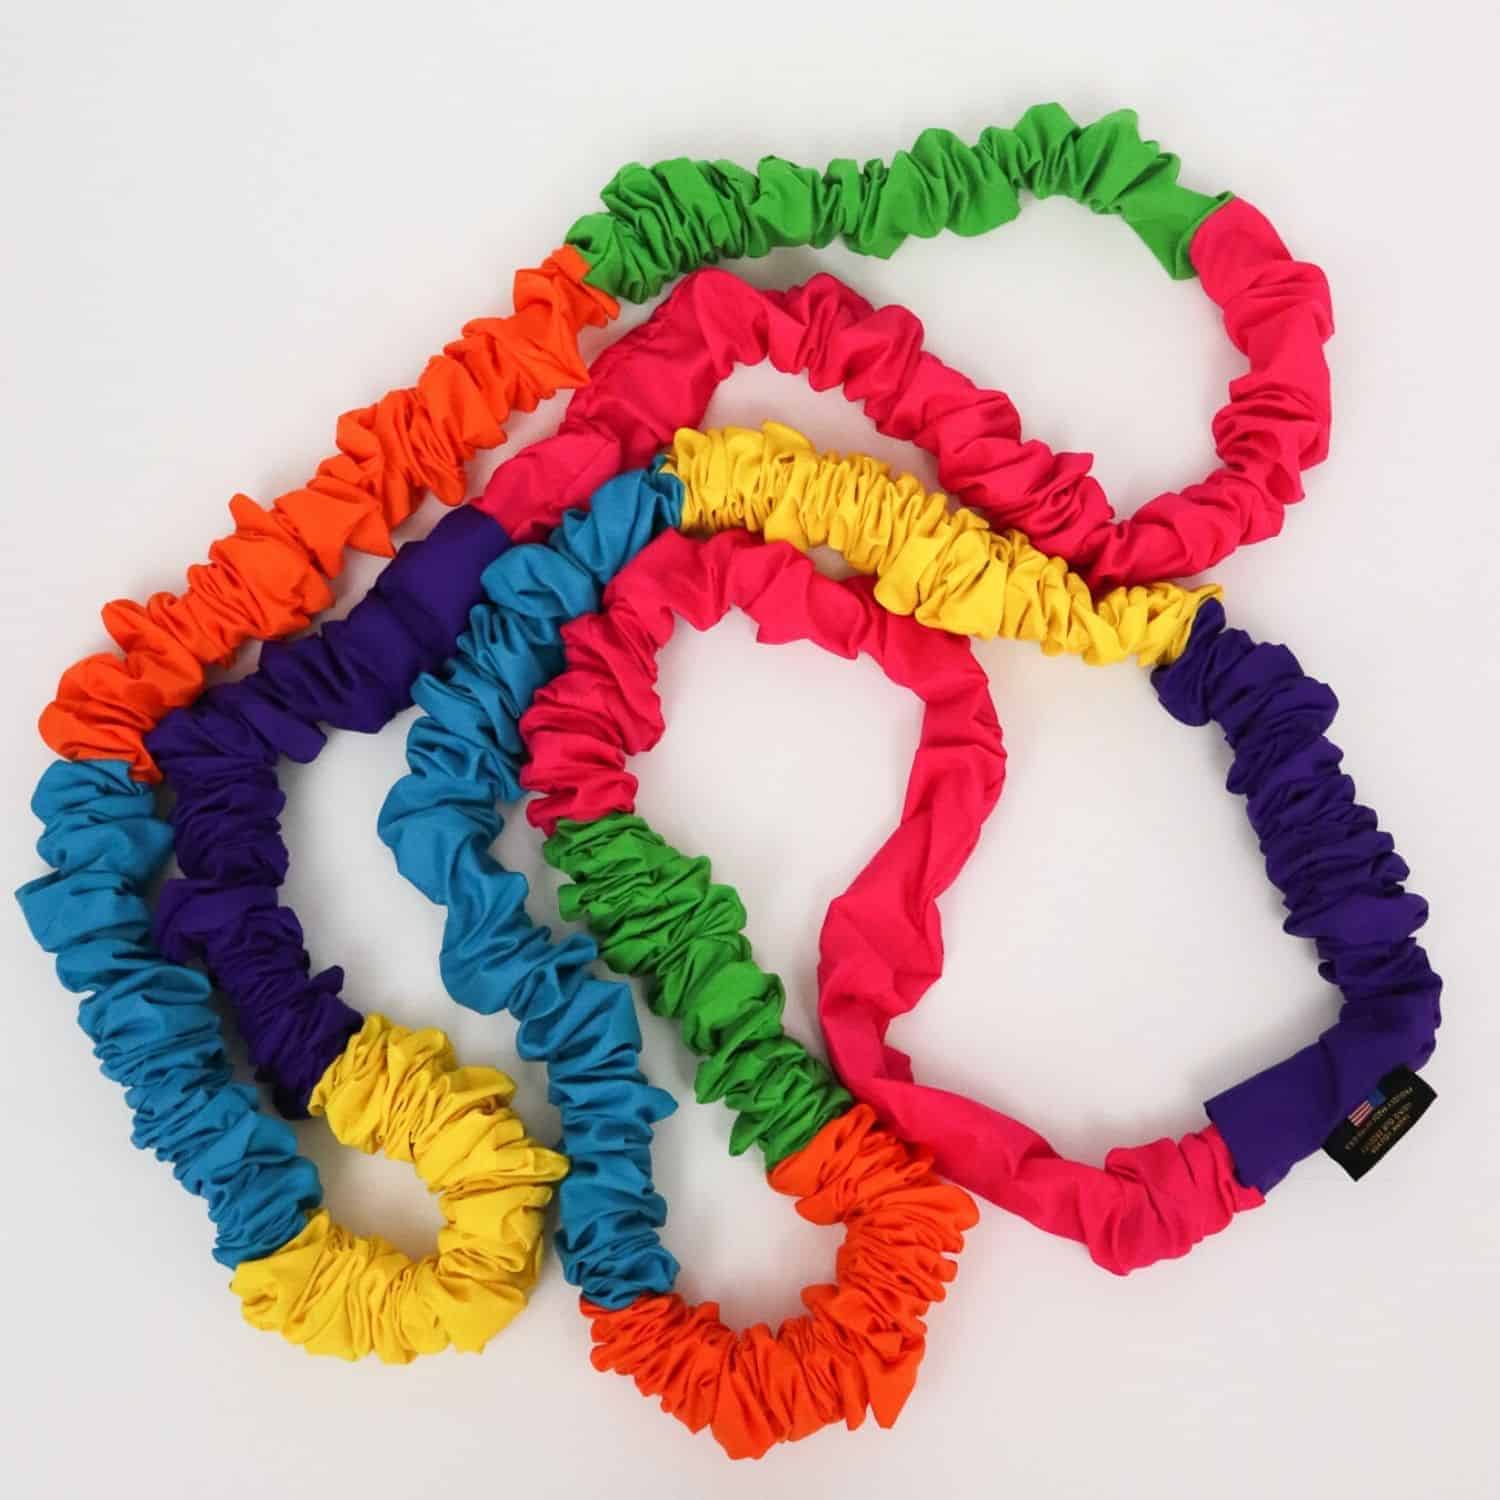 Custom Custom Elastic Bands Manufacturers and Suppliers - Free